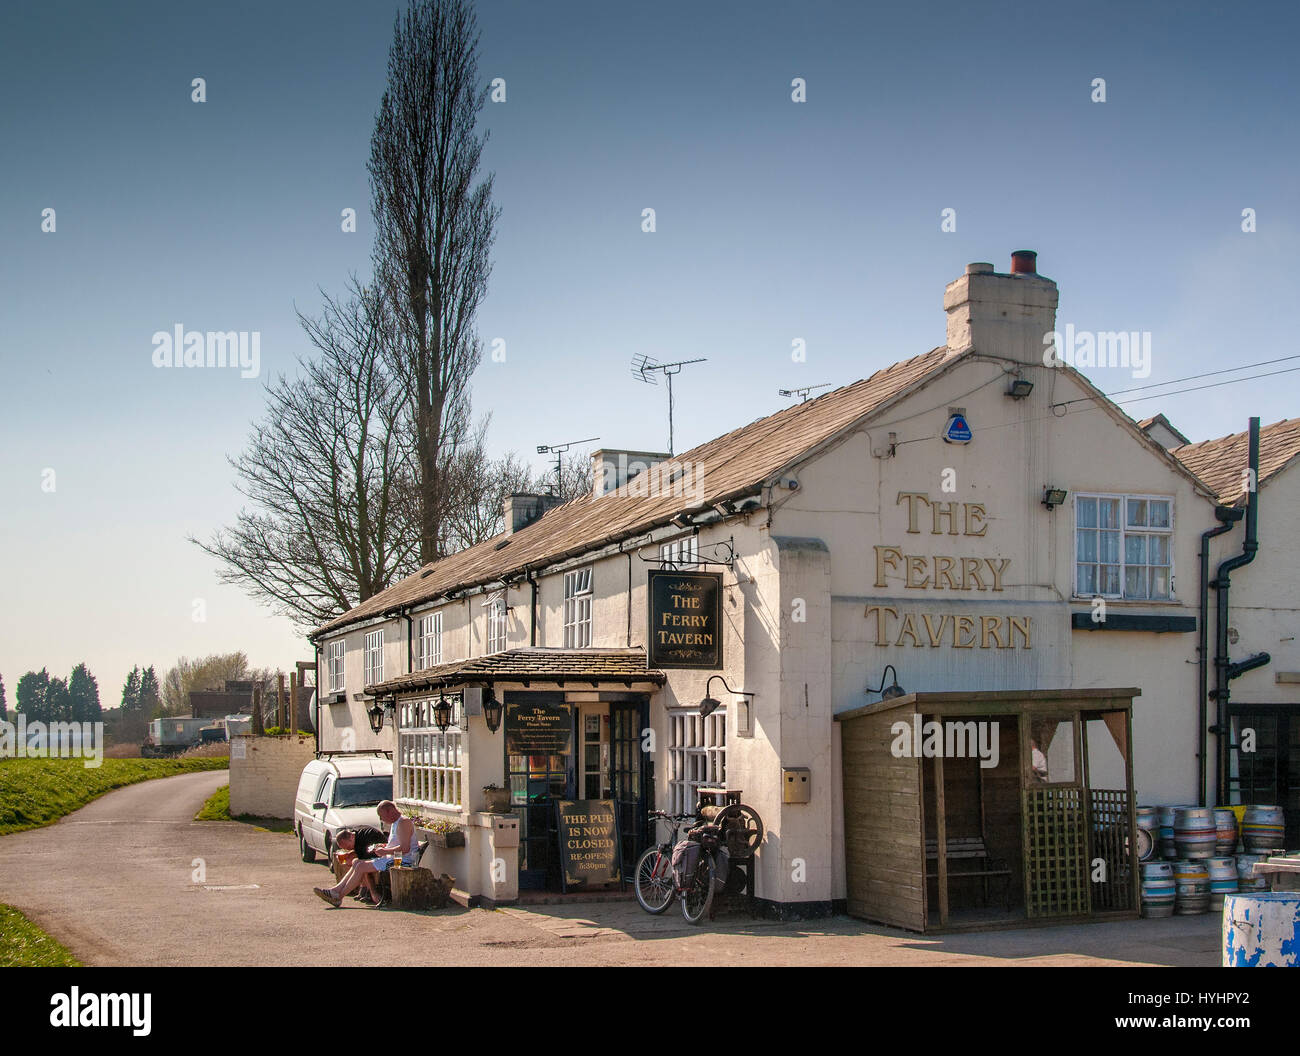 The Fiddlers Ferry Tavern pub at Penketh. Cheshire. Stock Photo